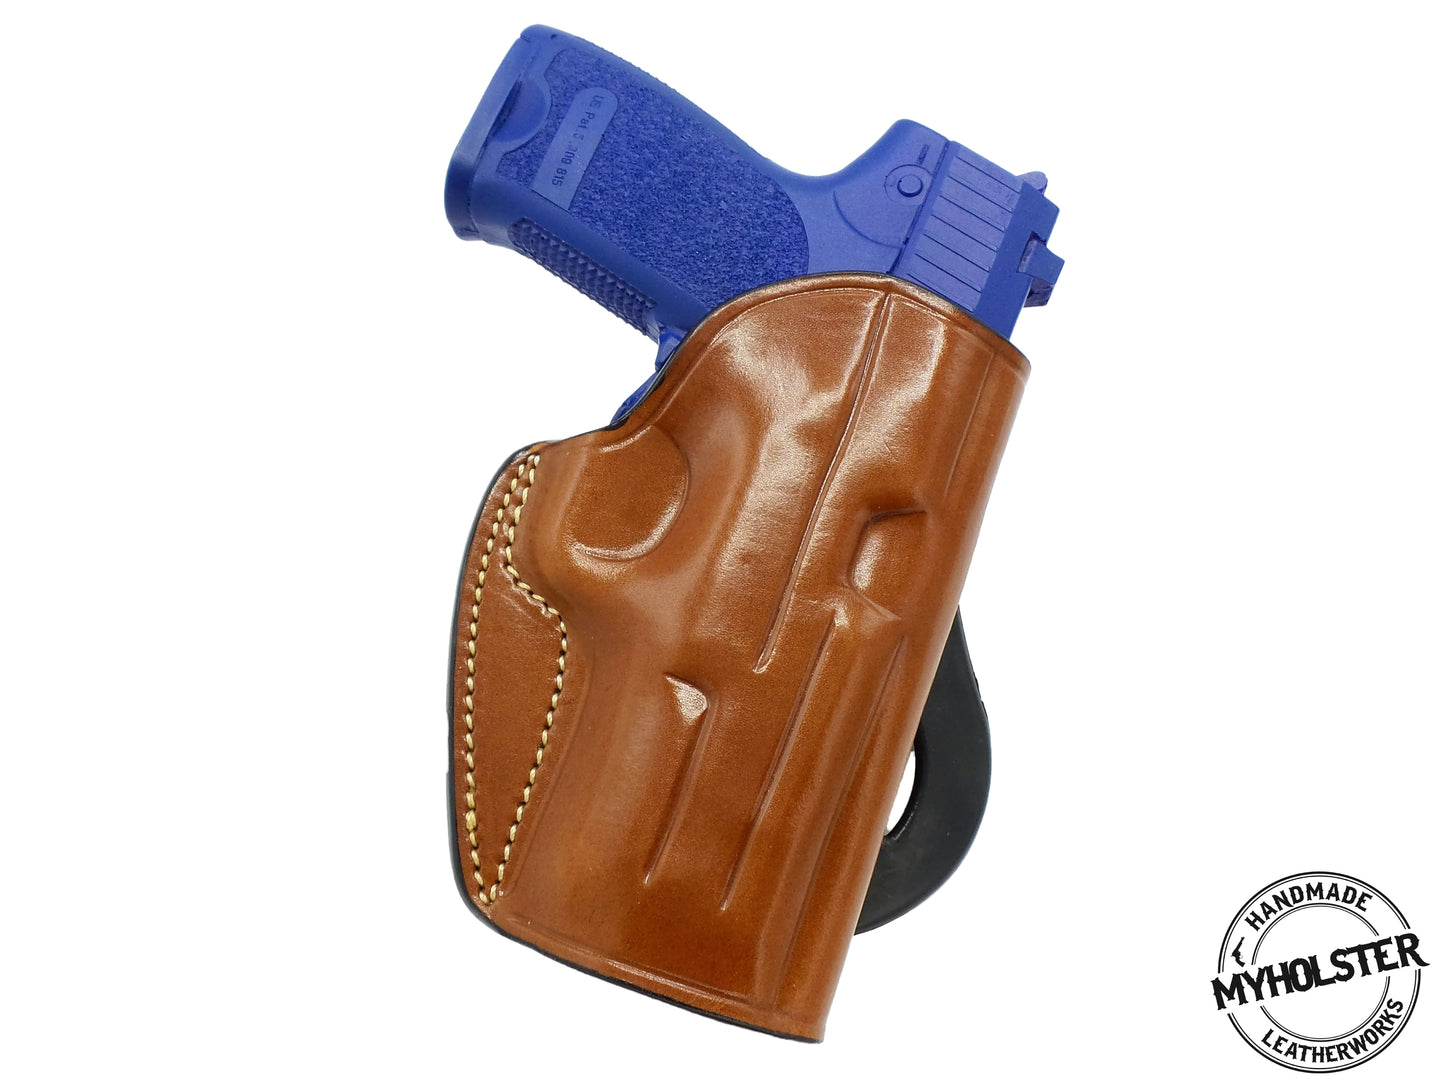 Heckler & Koch 45 COMPACT (HK45) OWB Quick Draw Right Hand Leather Paddle Holster